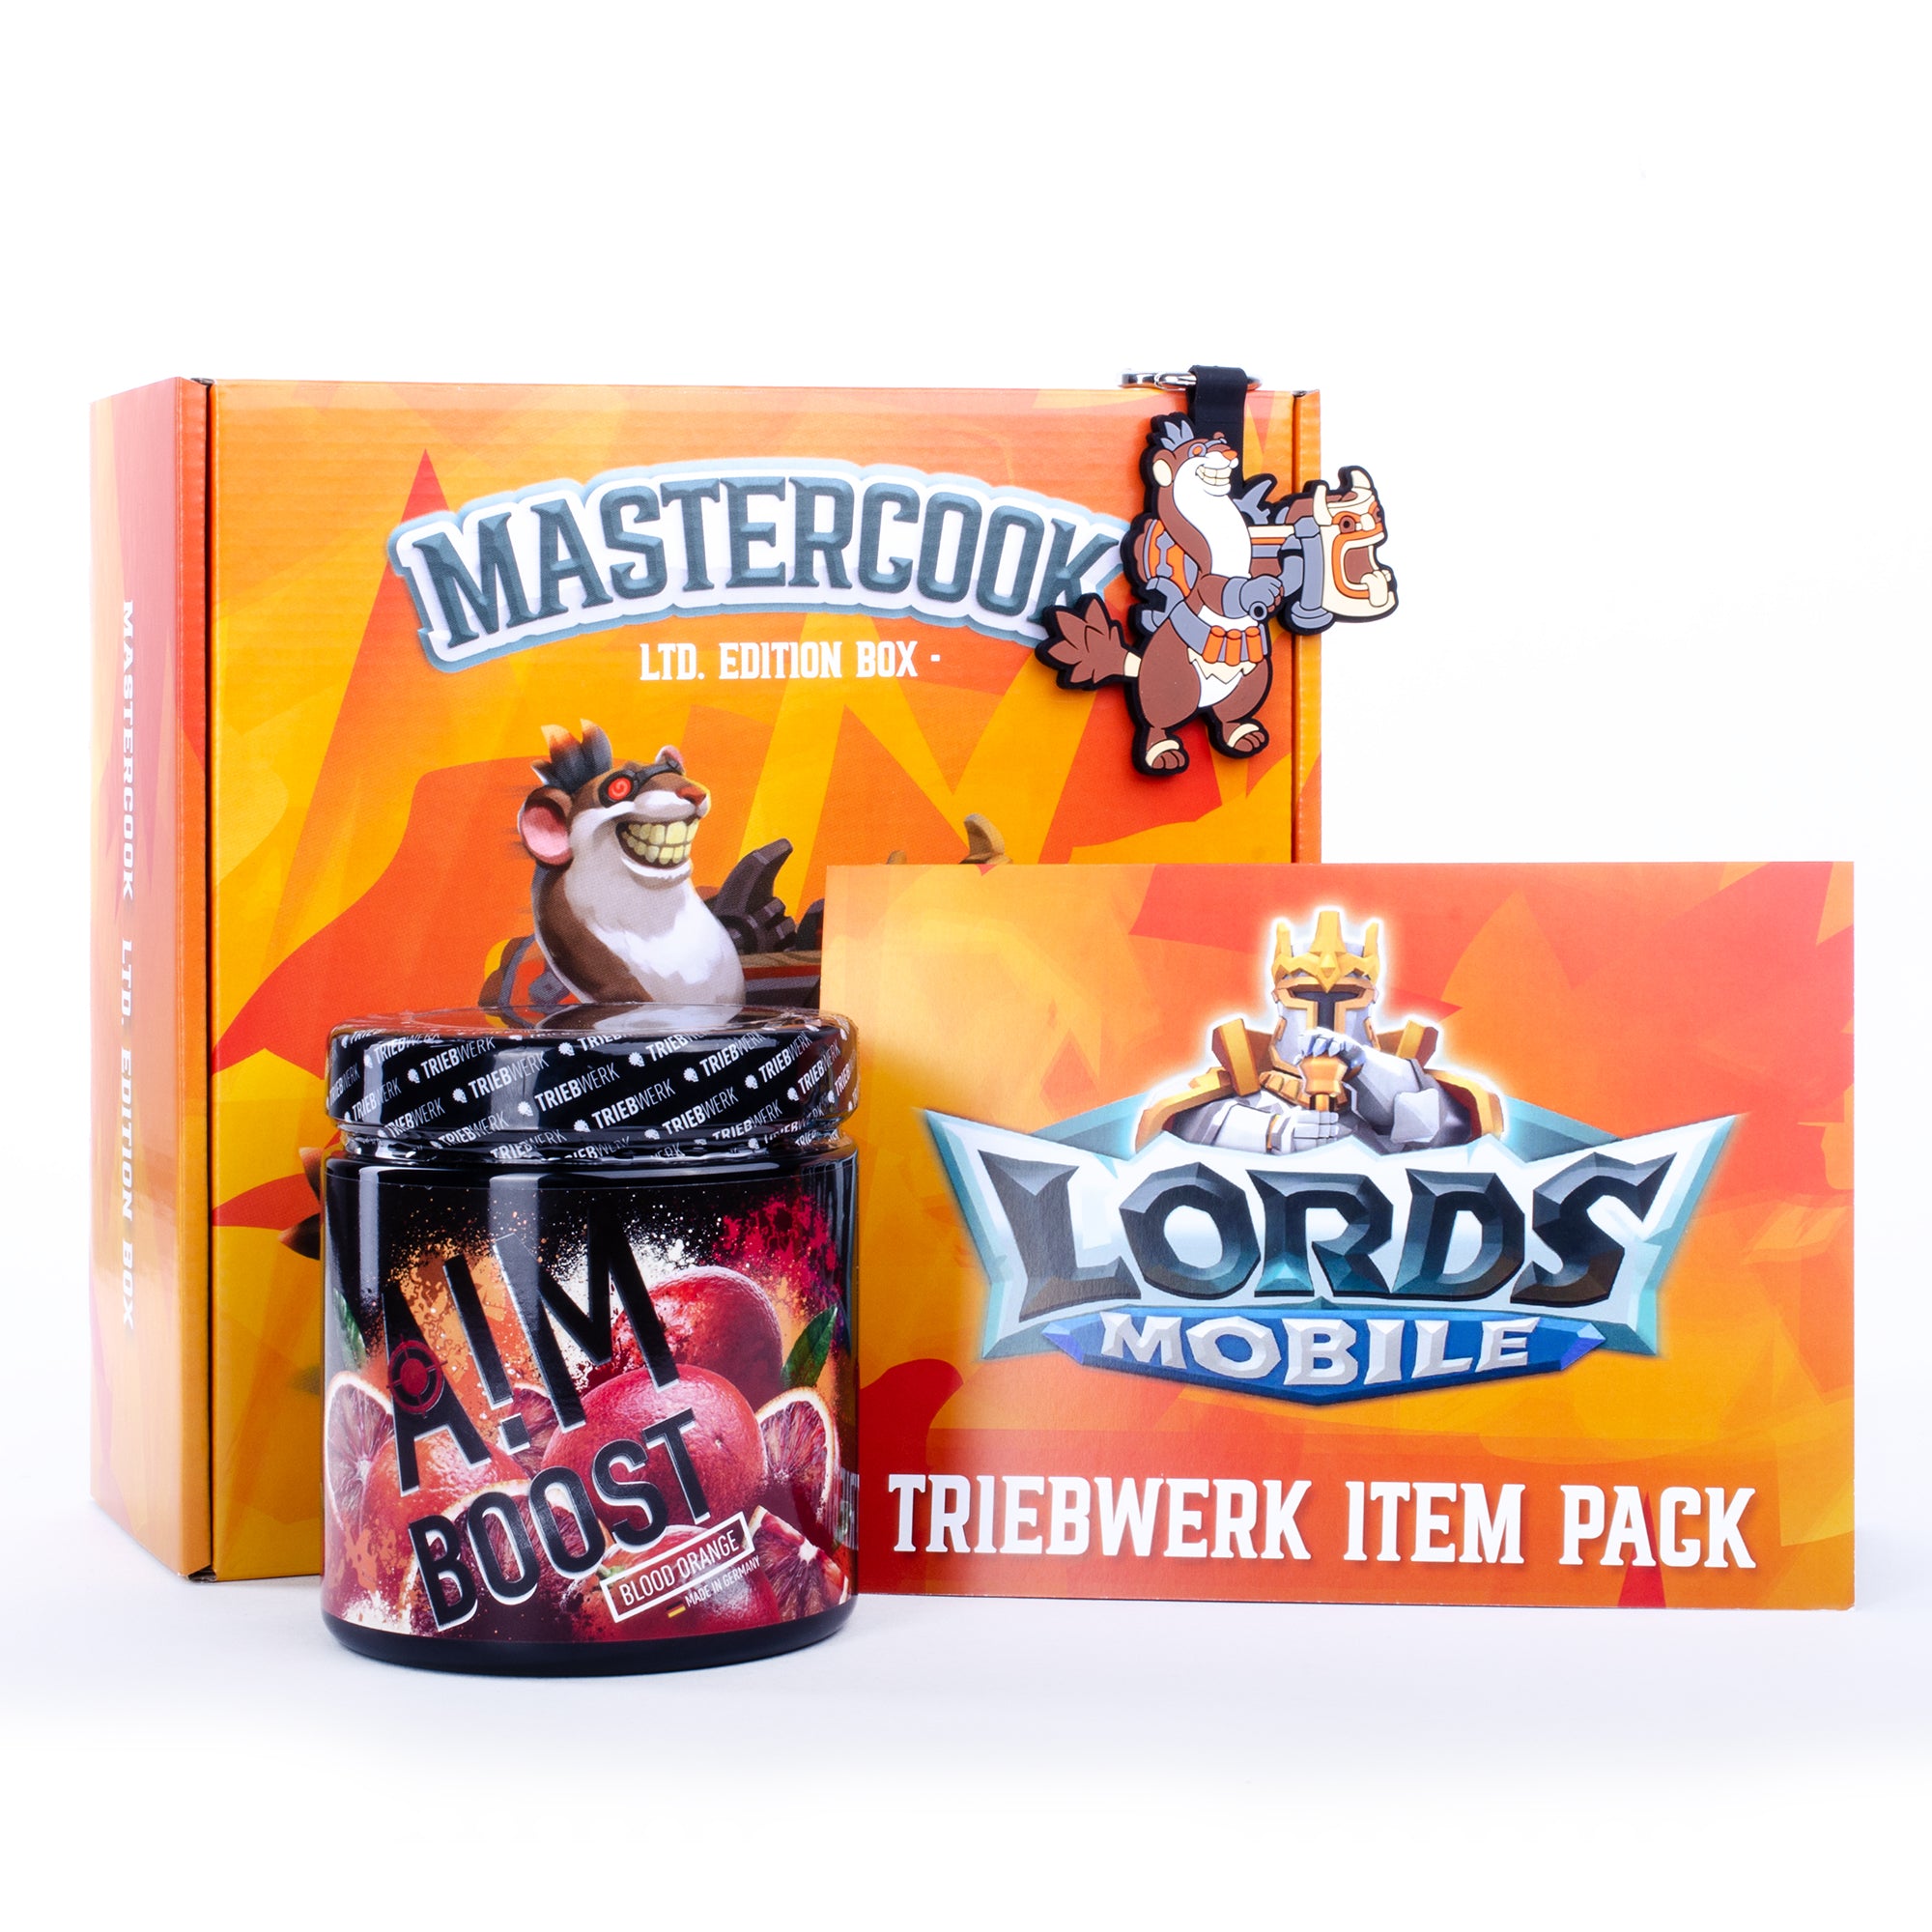 Lords Mobile Box - Mastercook